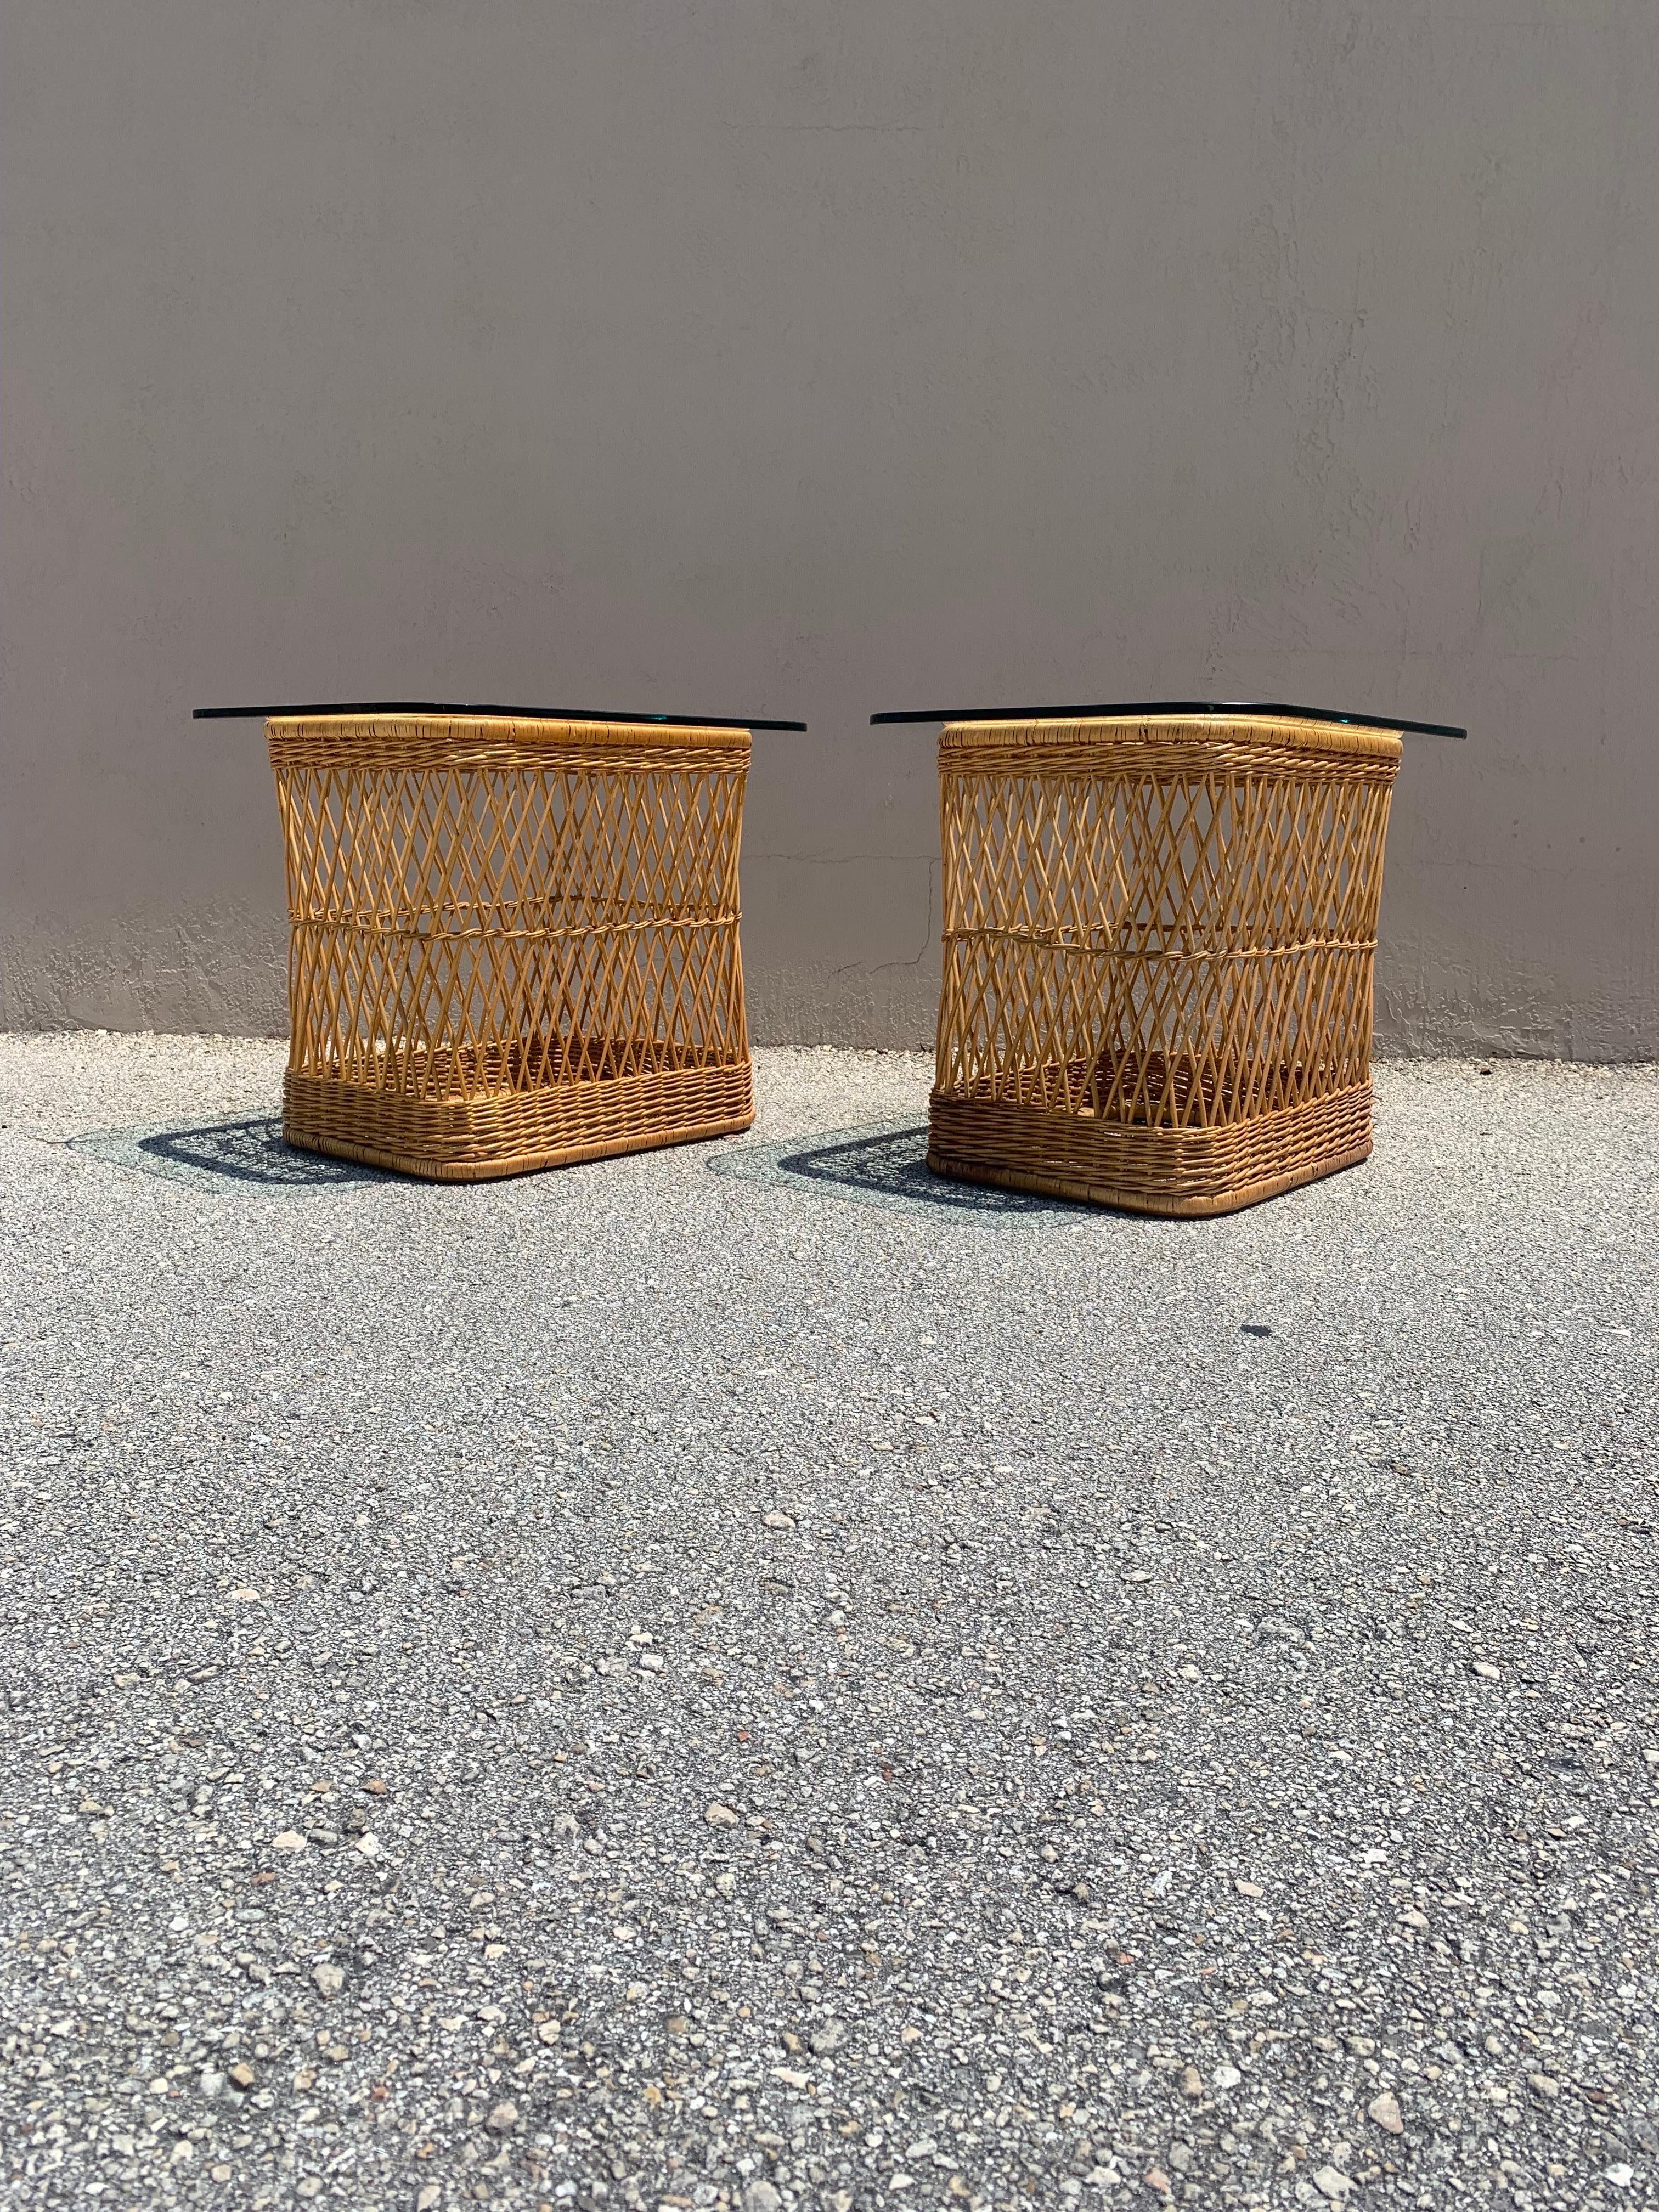 A pair of side tables designed by Davis Allen for McGuire of San Francisco. Made from rattan and cane, finished with a glass top. A delicate and handsome design, however the table itself is very sturdy. Design plays beautifully between the natural